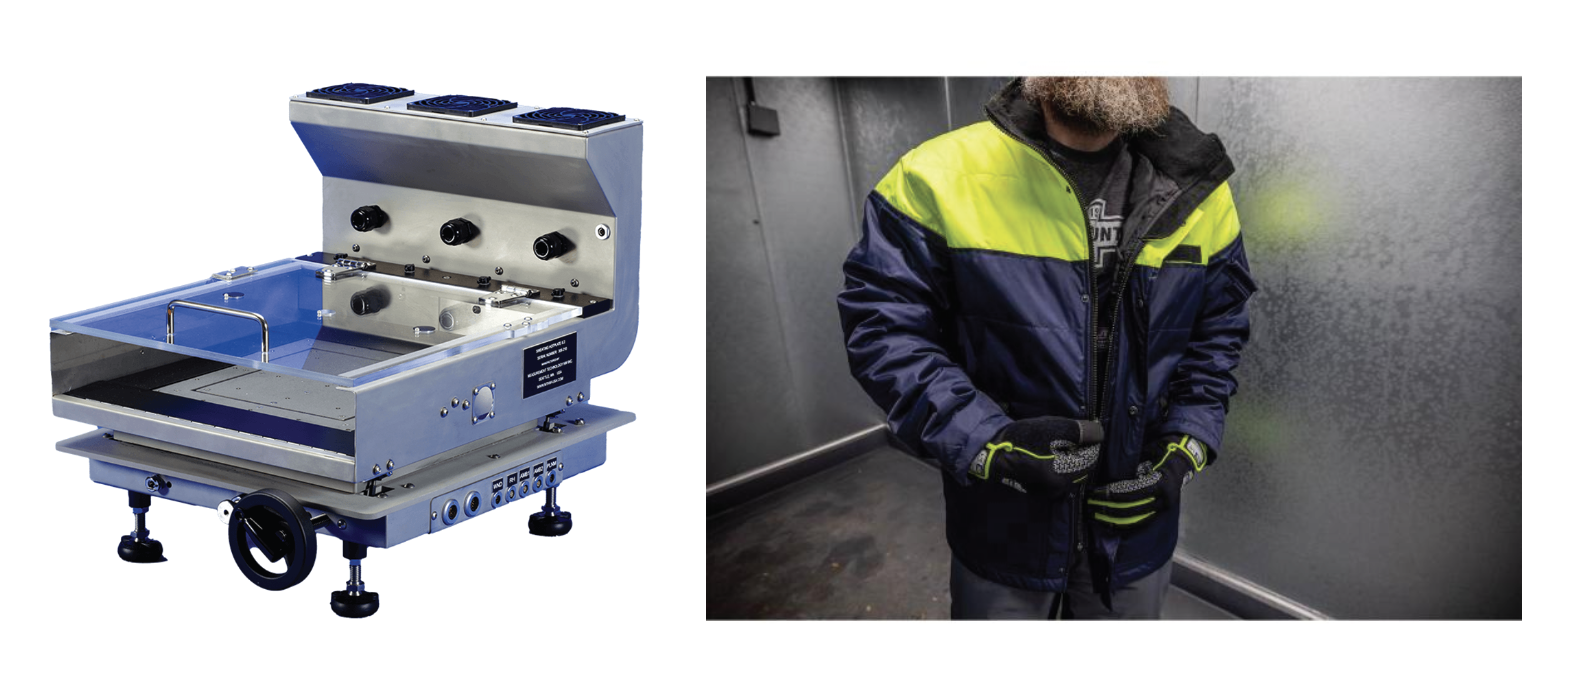 (Left) Image of a guarded got plate used to determine CLO rating. (Right) Model wearing 6476 insulated freezer jacket and 850 insulated freezer gloves